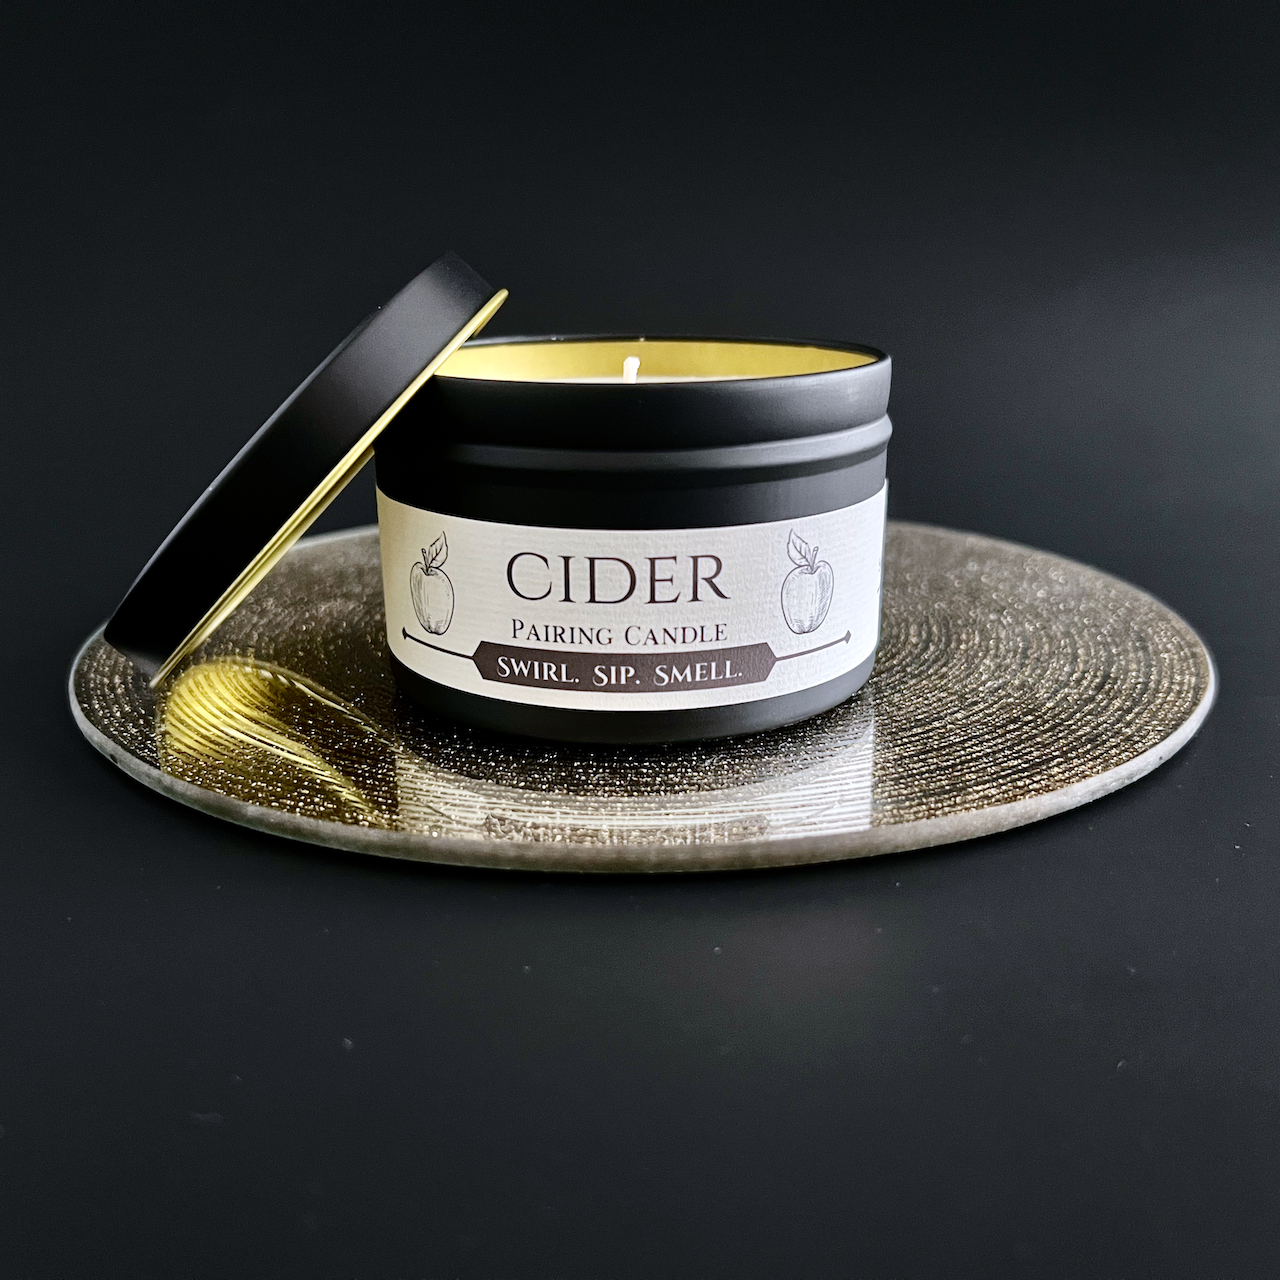 Cider Candle 8 oz Black with Lid